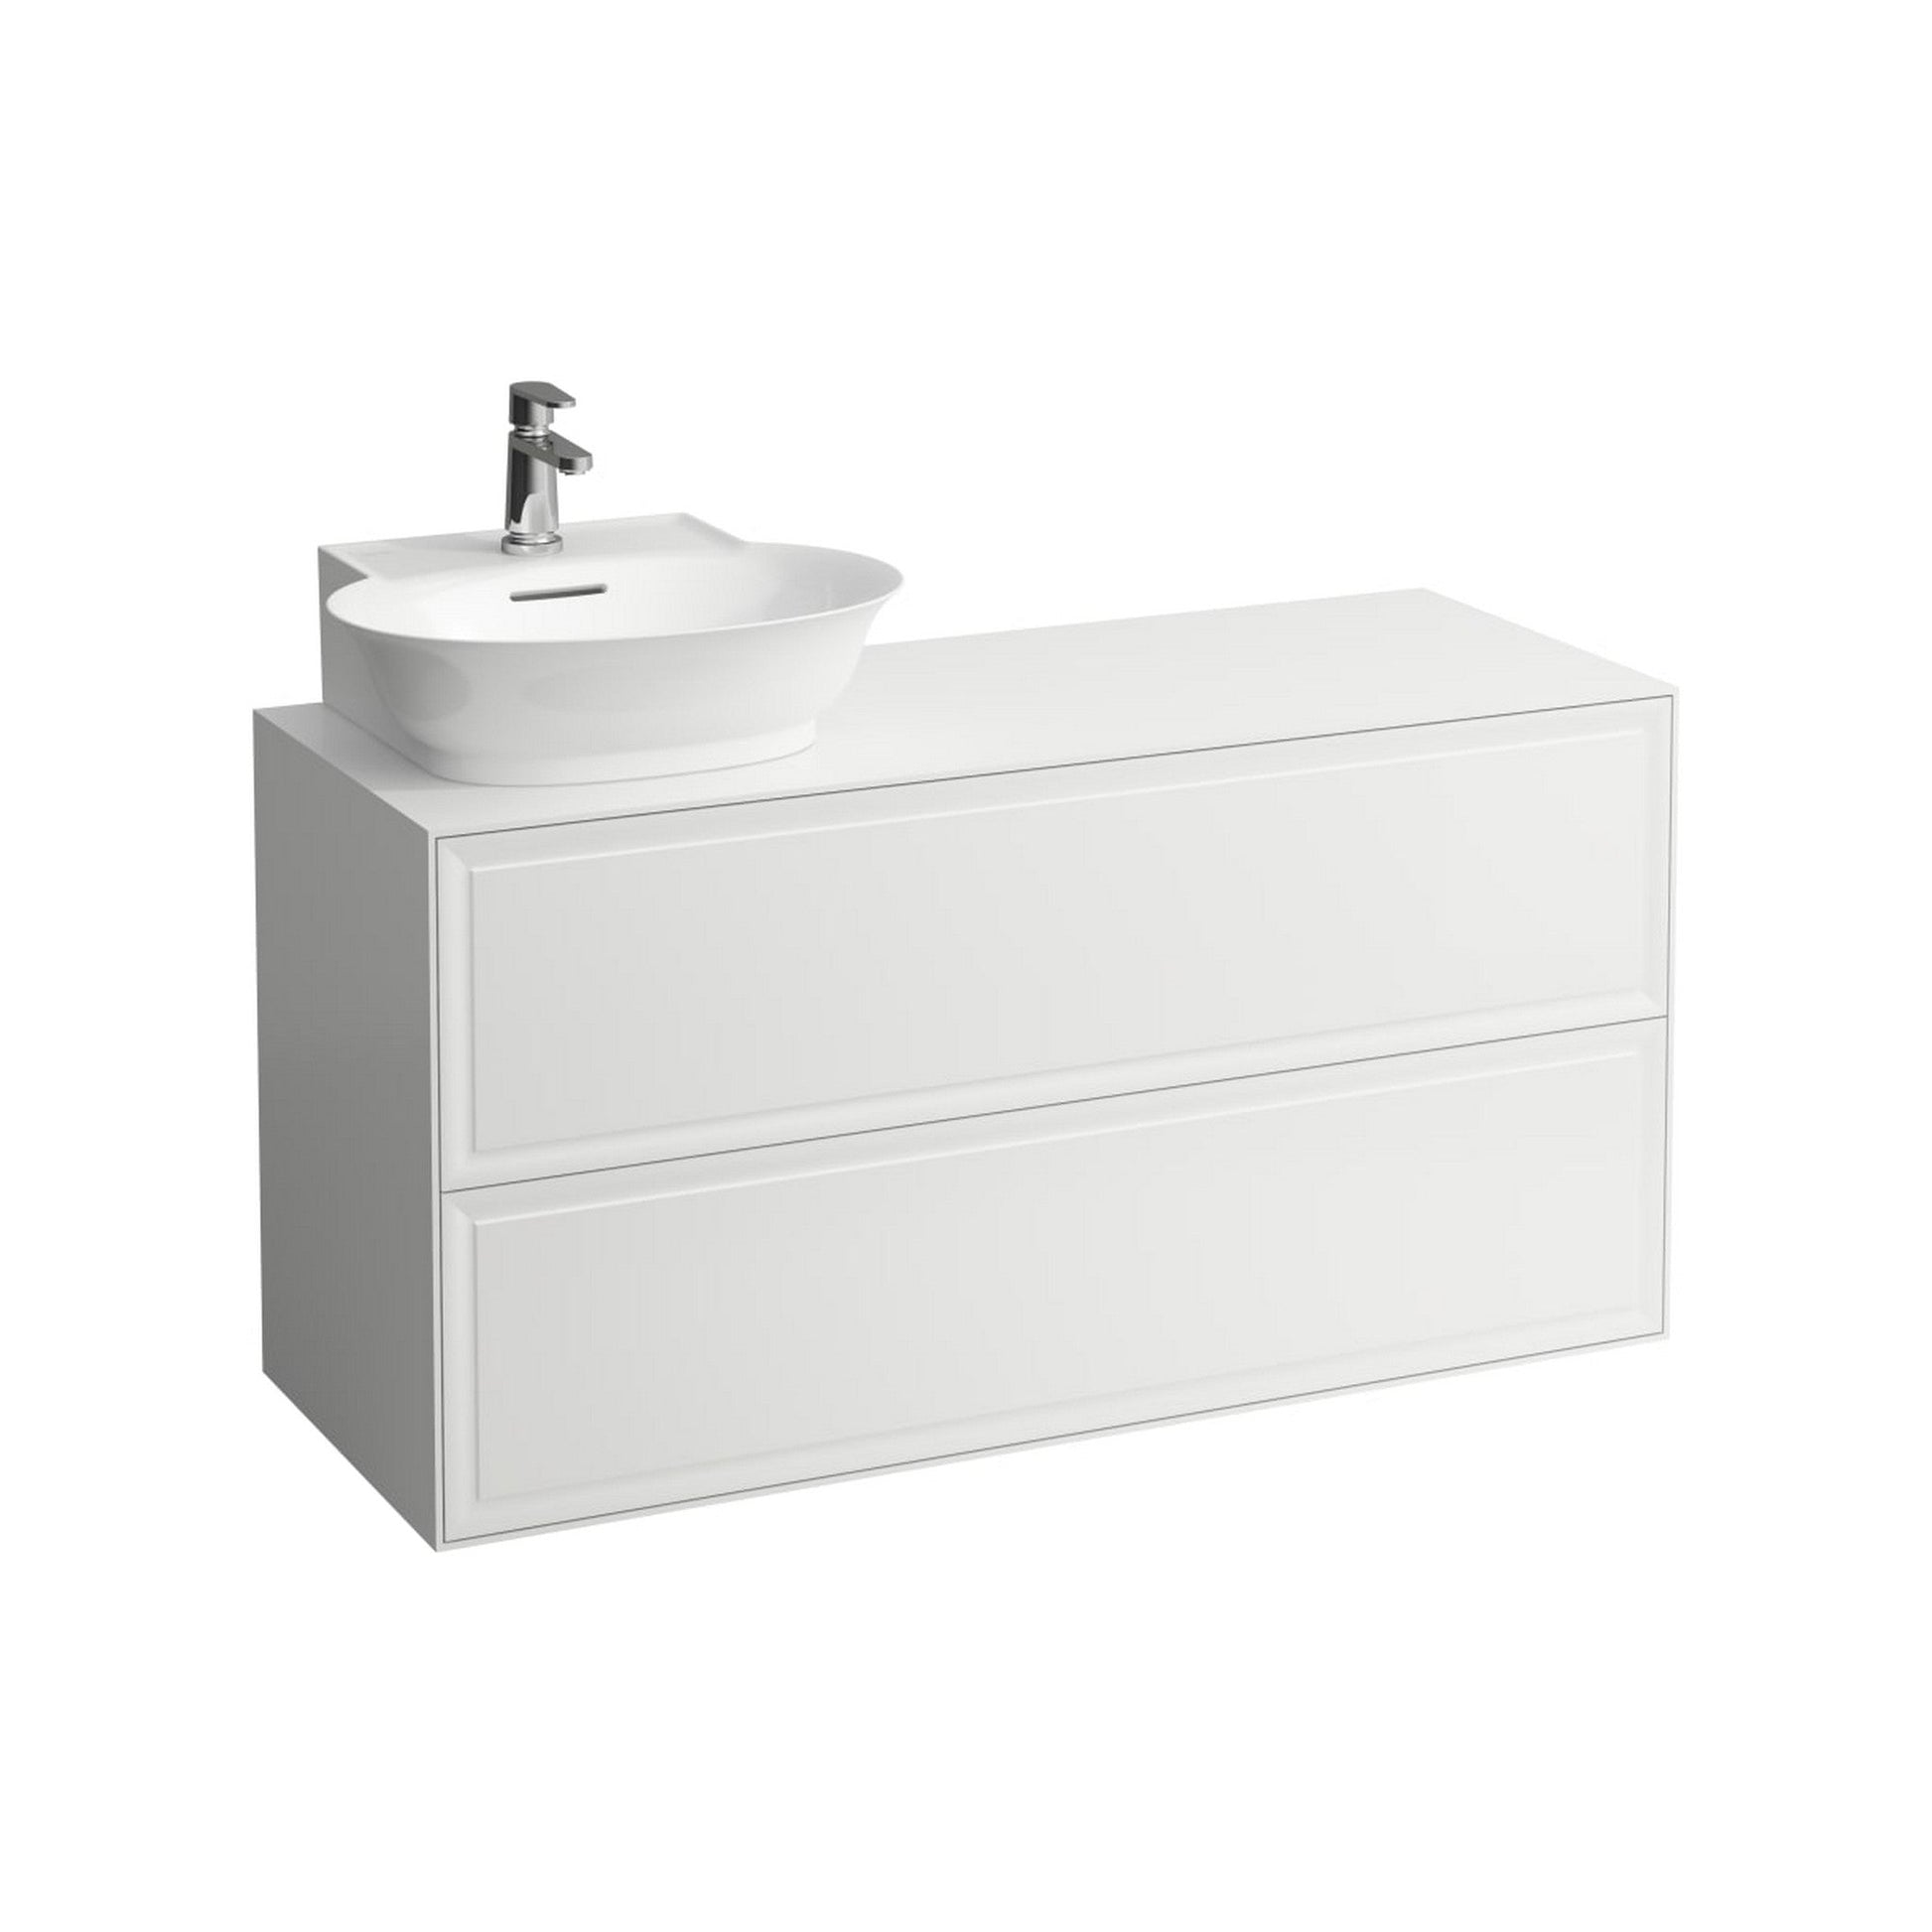 Laufen New Classic 46" 2-Drawer White Wall-Mounted Vanity With Sink Cut-out on the Left for New Classic Bathroom Sink Model: H816852